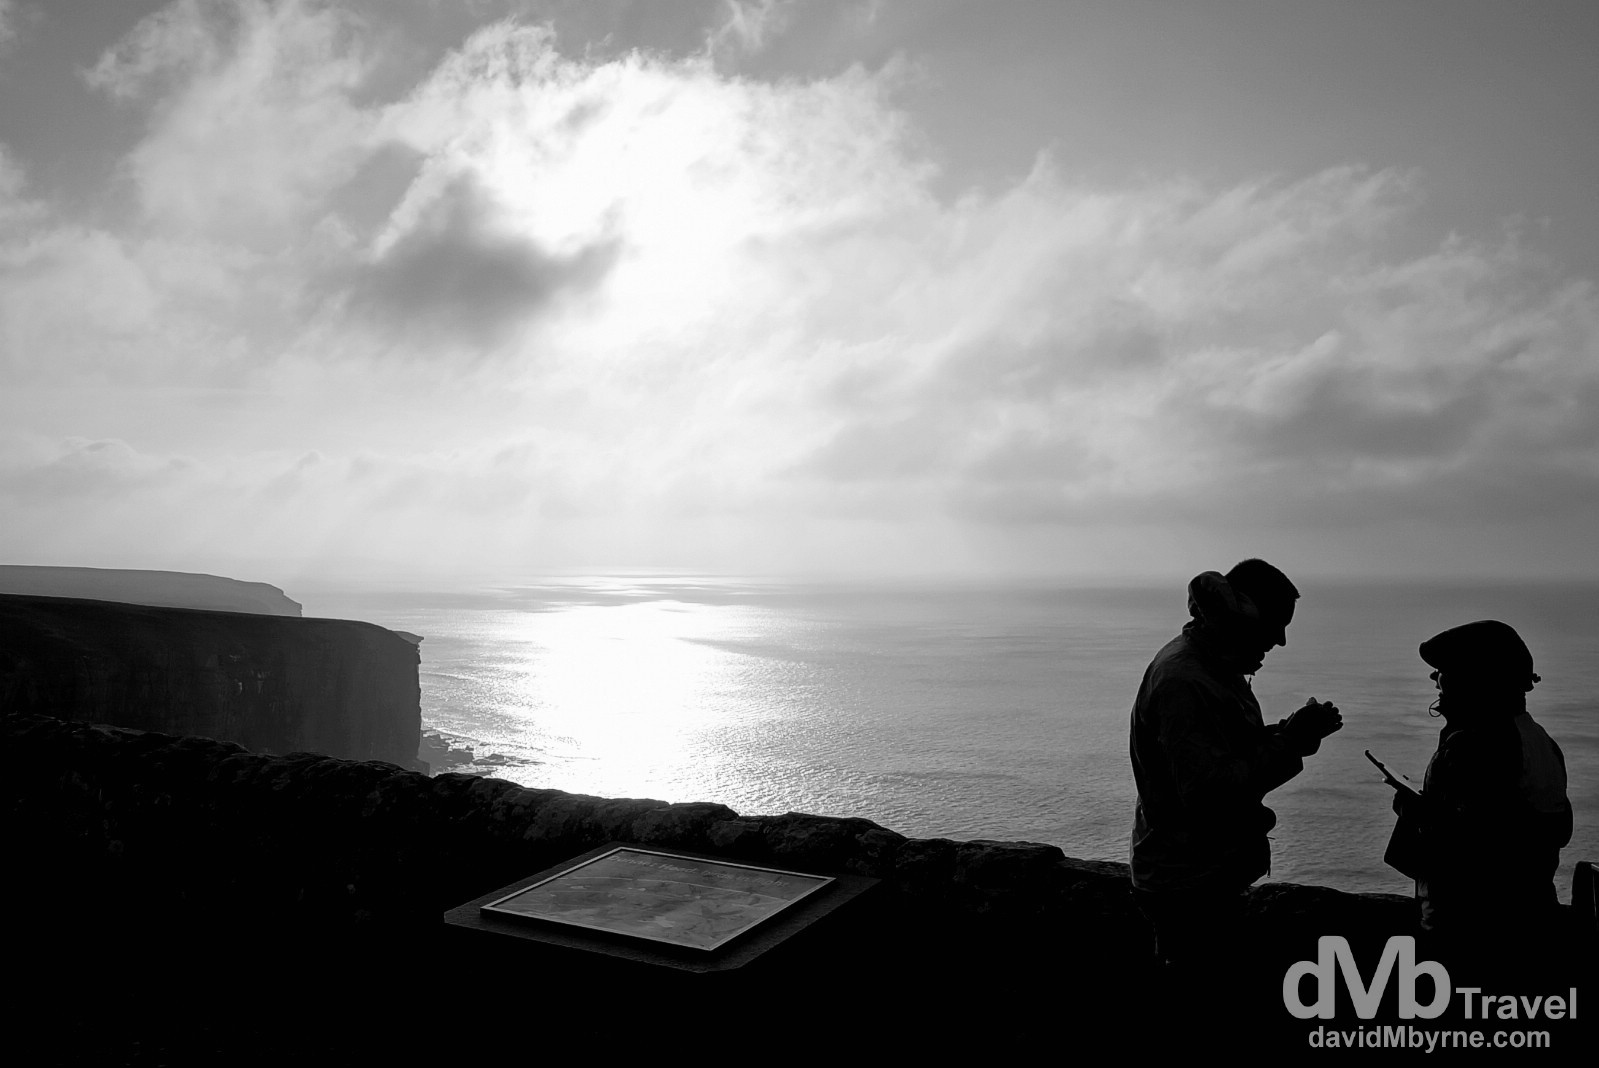 Silhouettes at Dunnet Head, the most northerly point on the British mainland. Dunnet Head, Scotland. September 14, 2014.